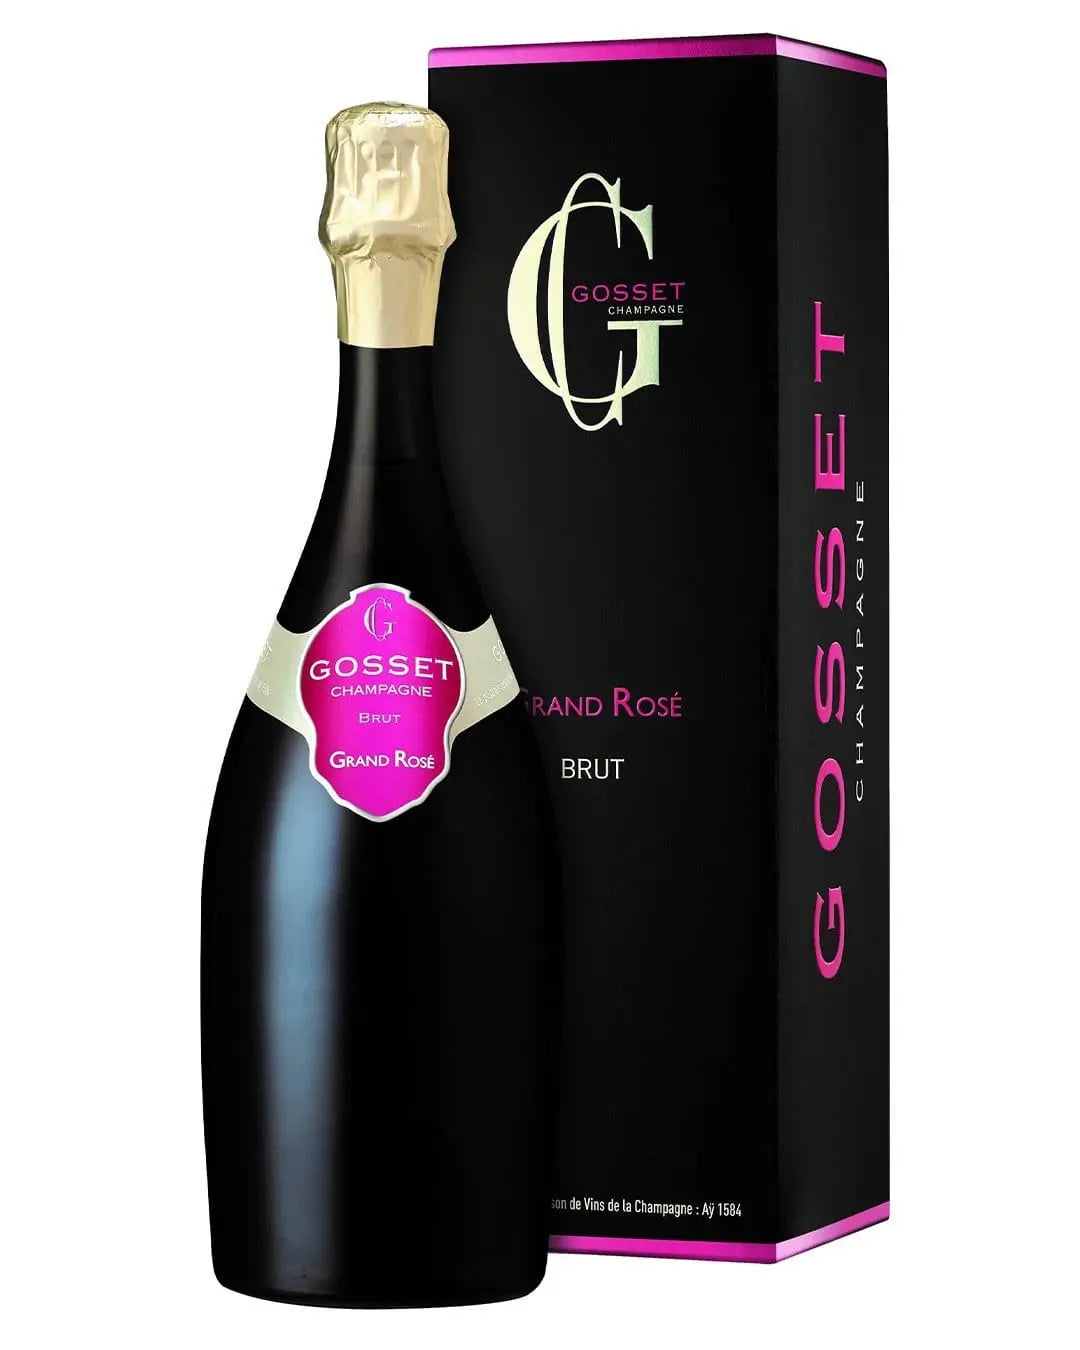 Gosset Grand Reserve Rose in Gift Box, 75 cl Champagne & Sparkling